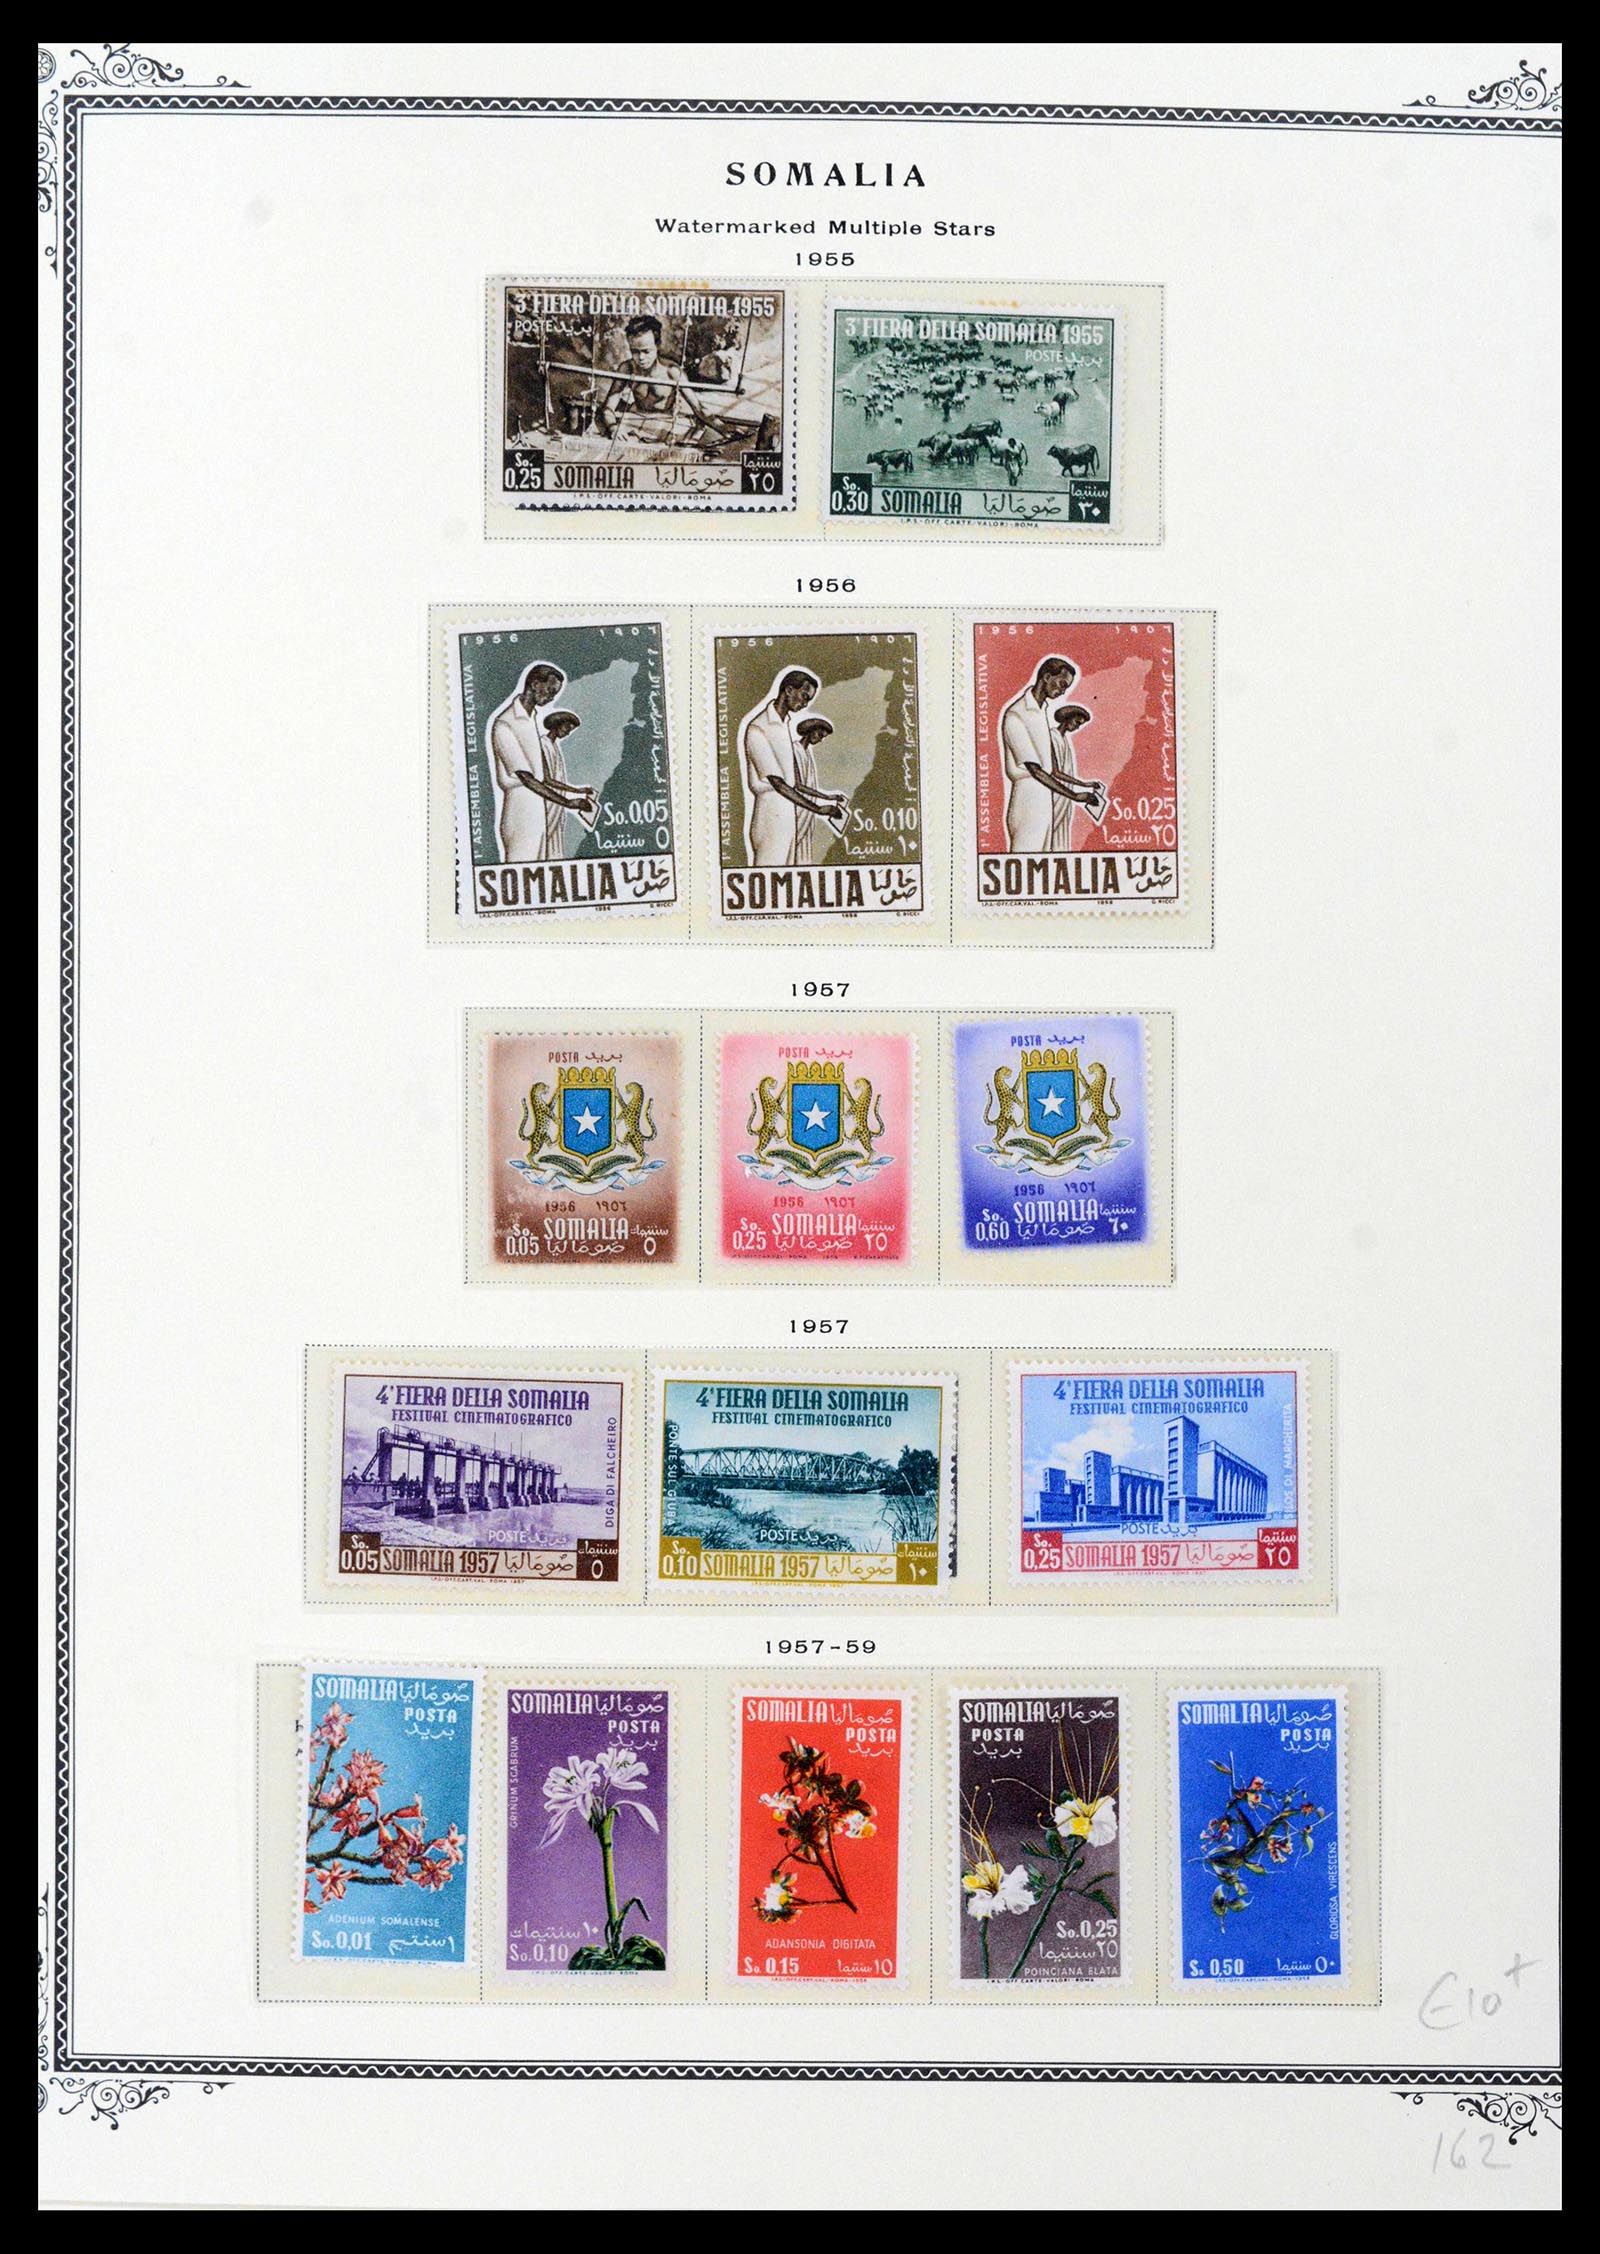 39011 0020 - Stamp collection 39011 Somalia complete 1903-1960.